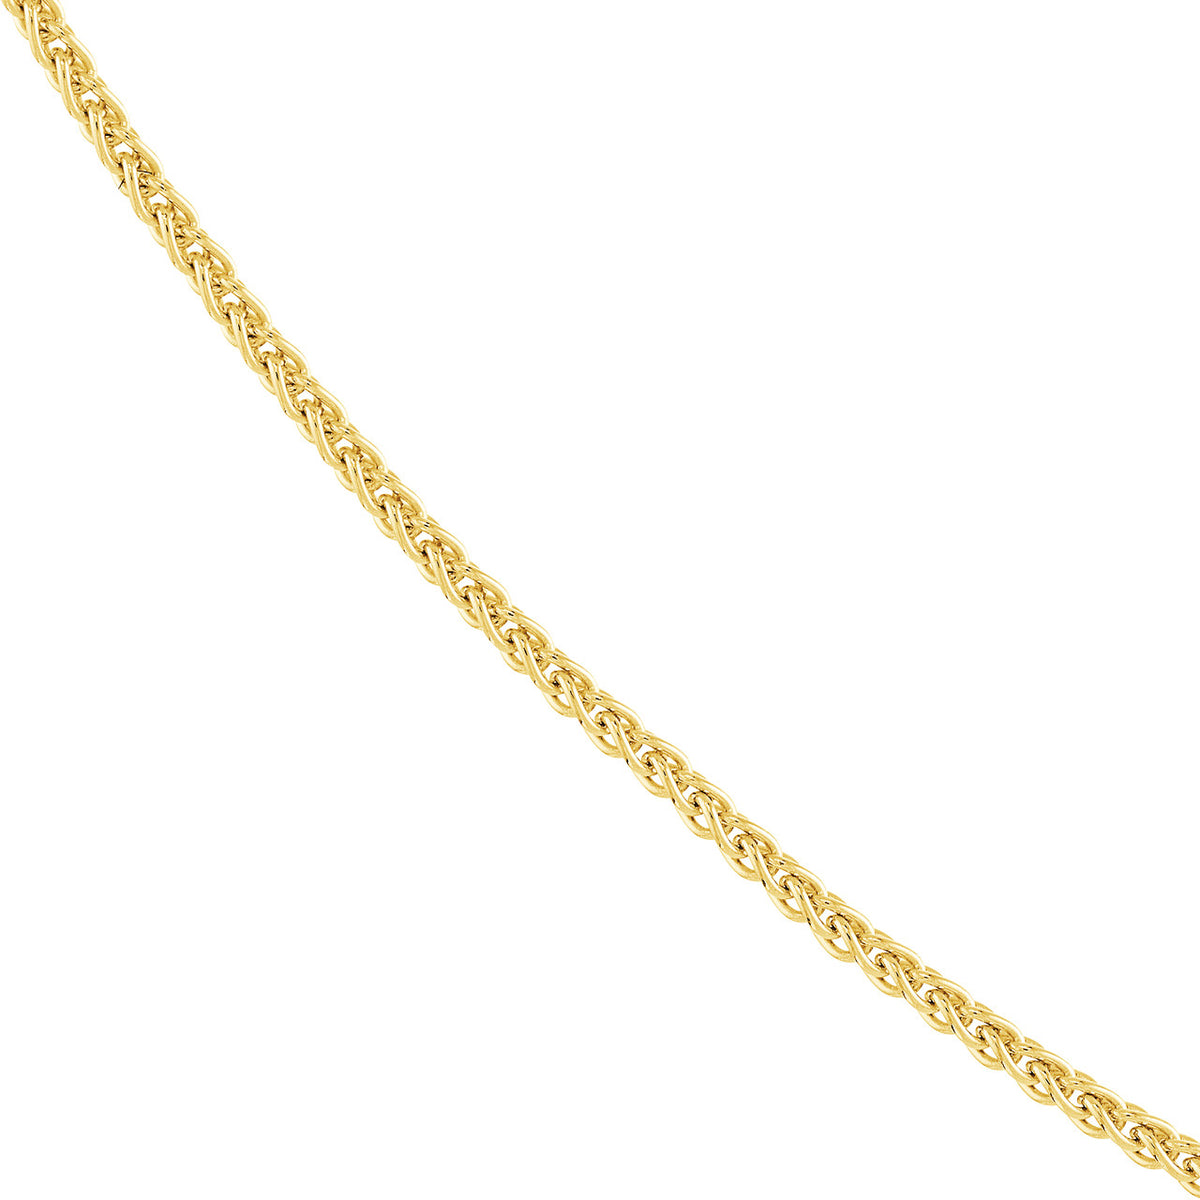 14K Yellow Gold or White Gold 0.85mm Adjustable Wheat Chain Necklace with Lobster Lock